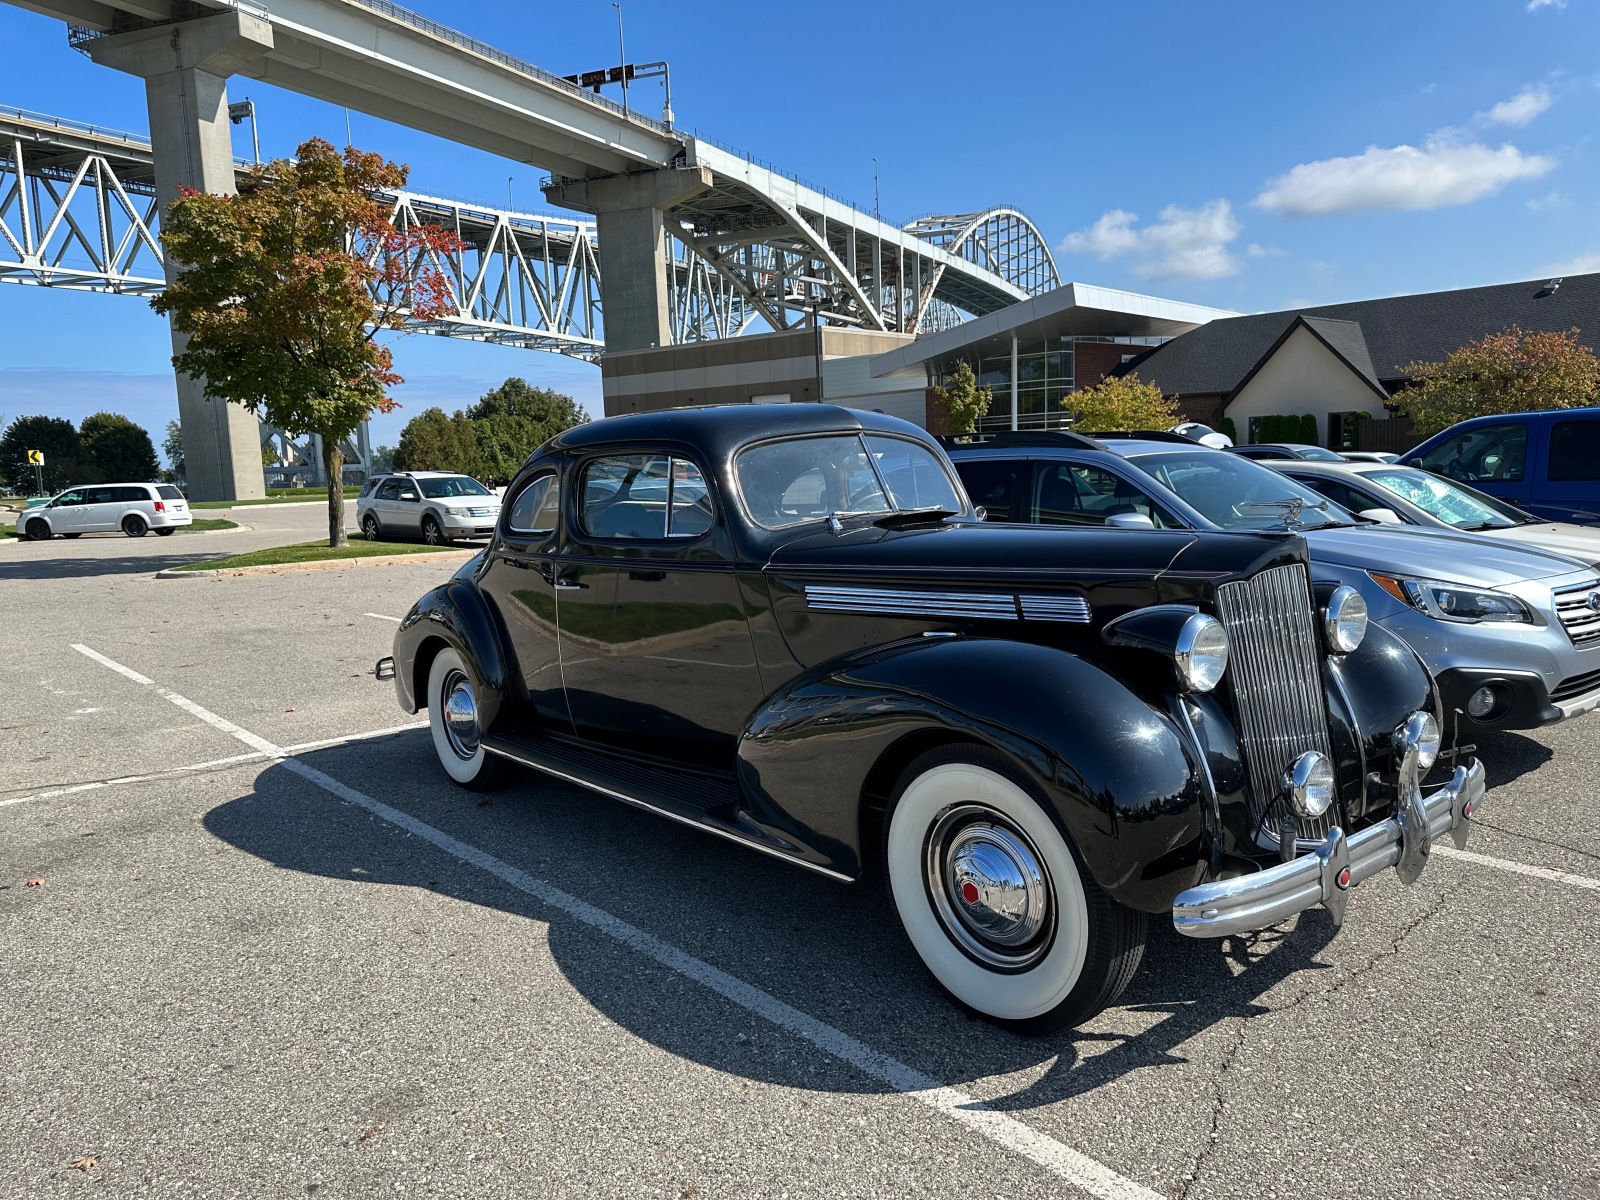 1939 120 1701 Club Coupe in black, front 3/4 view